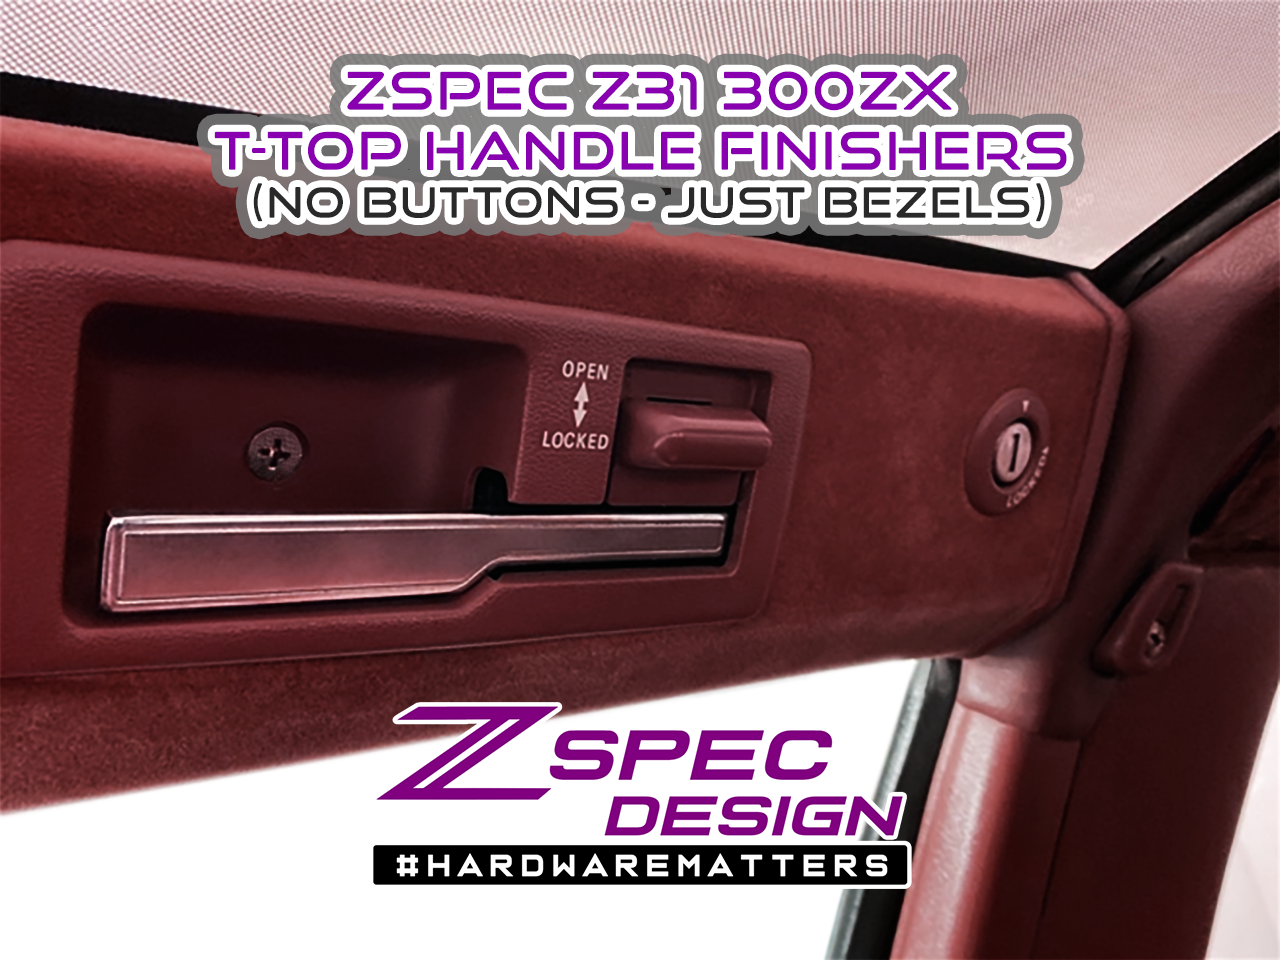 ** PRE-BUY ** ZSPEC T-Top Handle Finisher Sets, Nissan 300zx Z31 - Bezels Only (no Buttons)